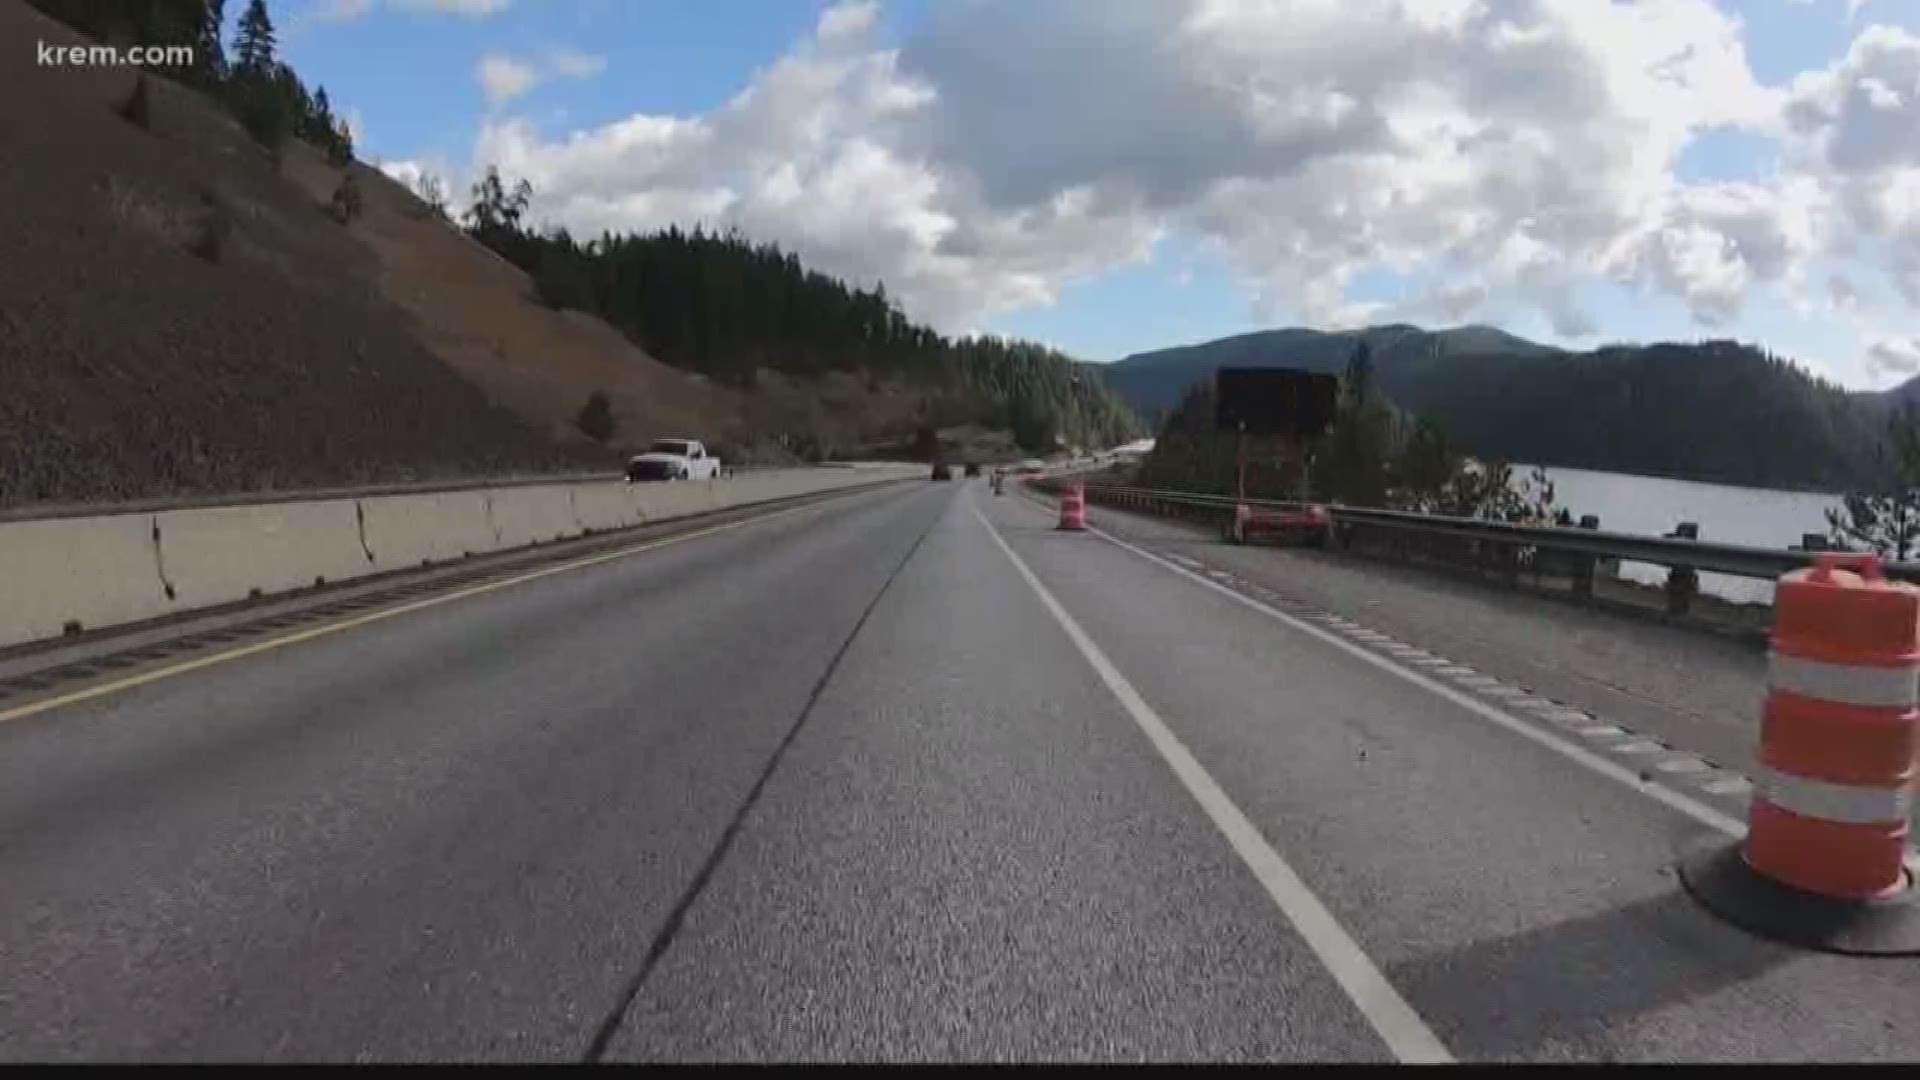 For the last year and a half, crews have been repairing the I-90 bridge over Lake Coeur d'Alene near Wolf Lodge Bay. So we wanted to know: when will it be done?